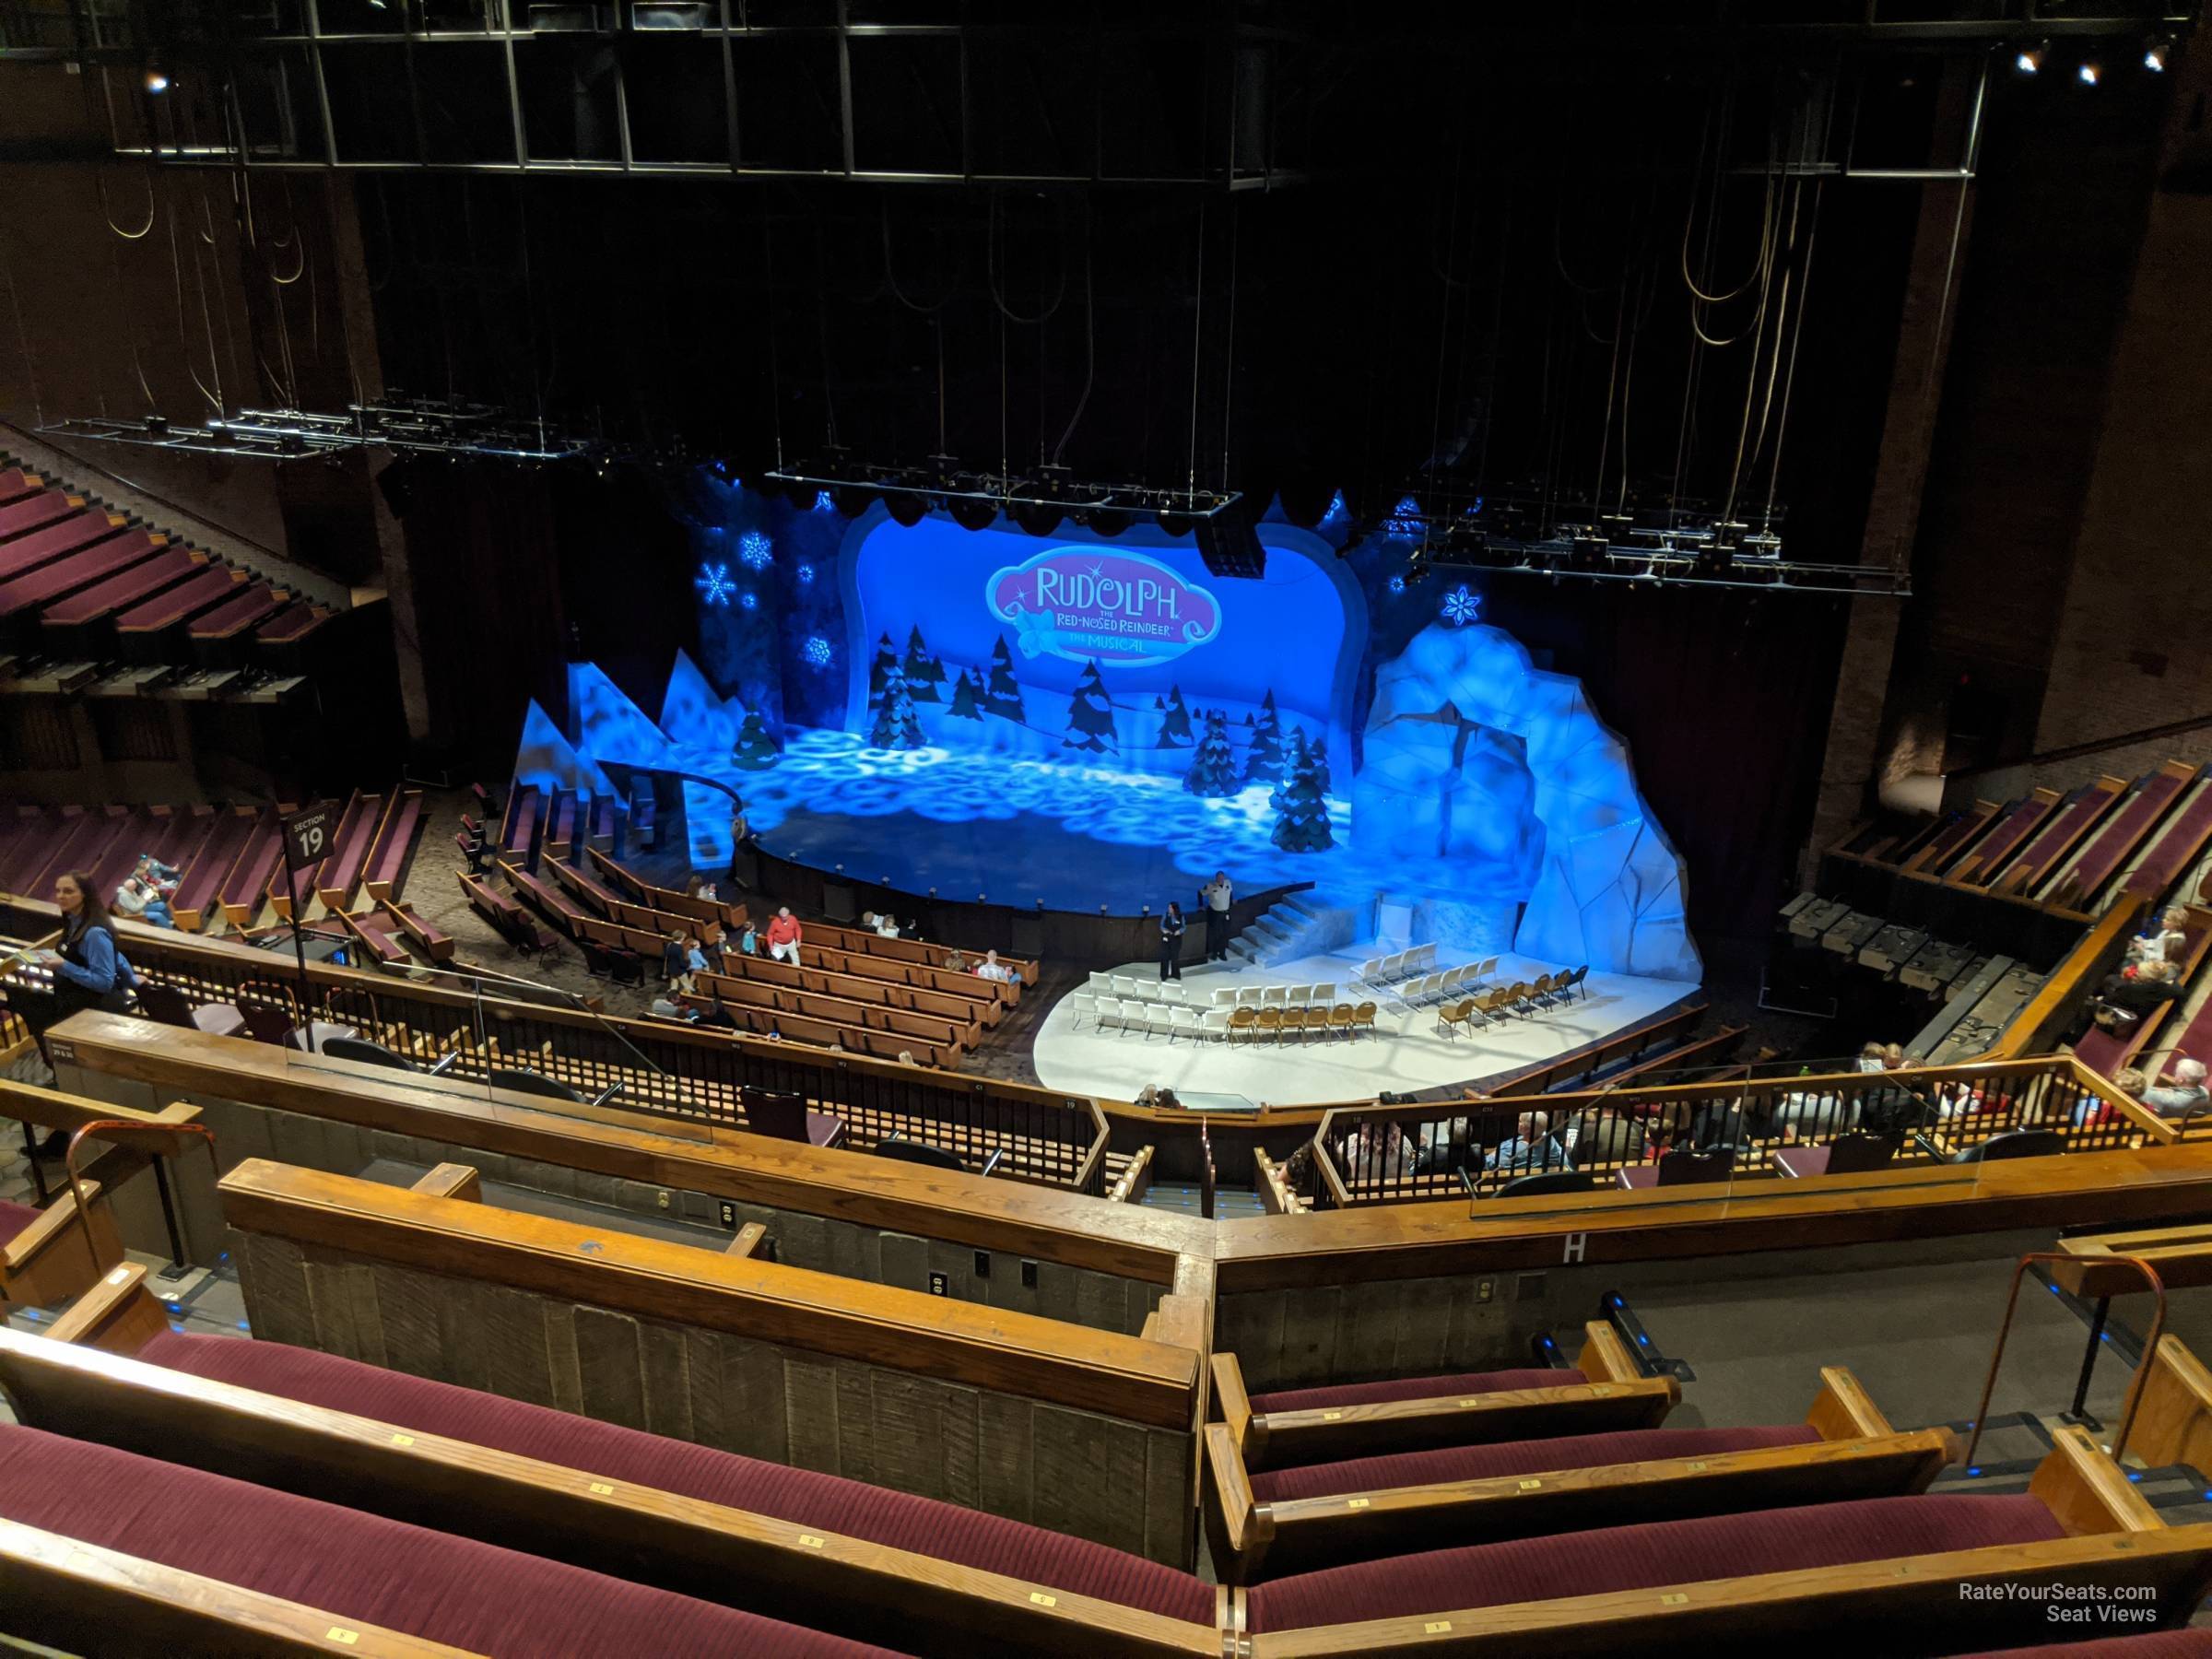 section 29, row p seat view  - grand ole opry house